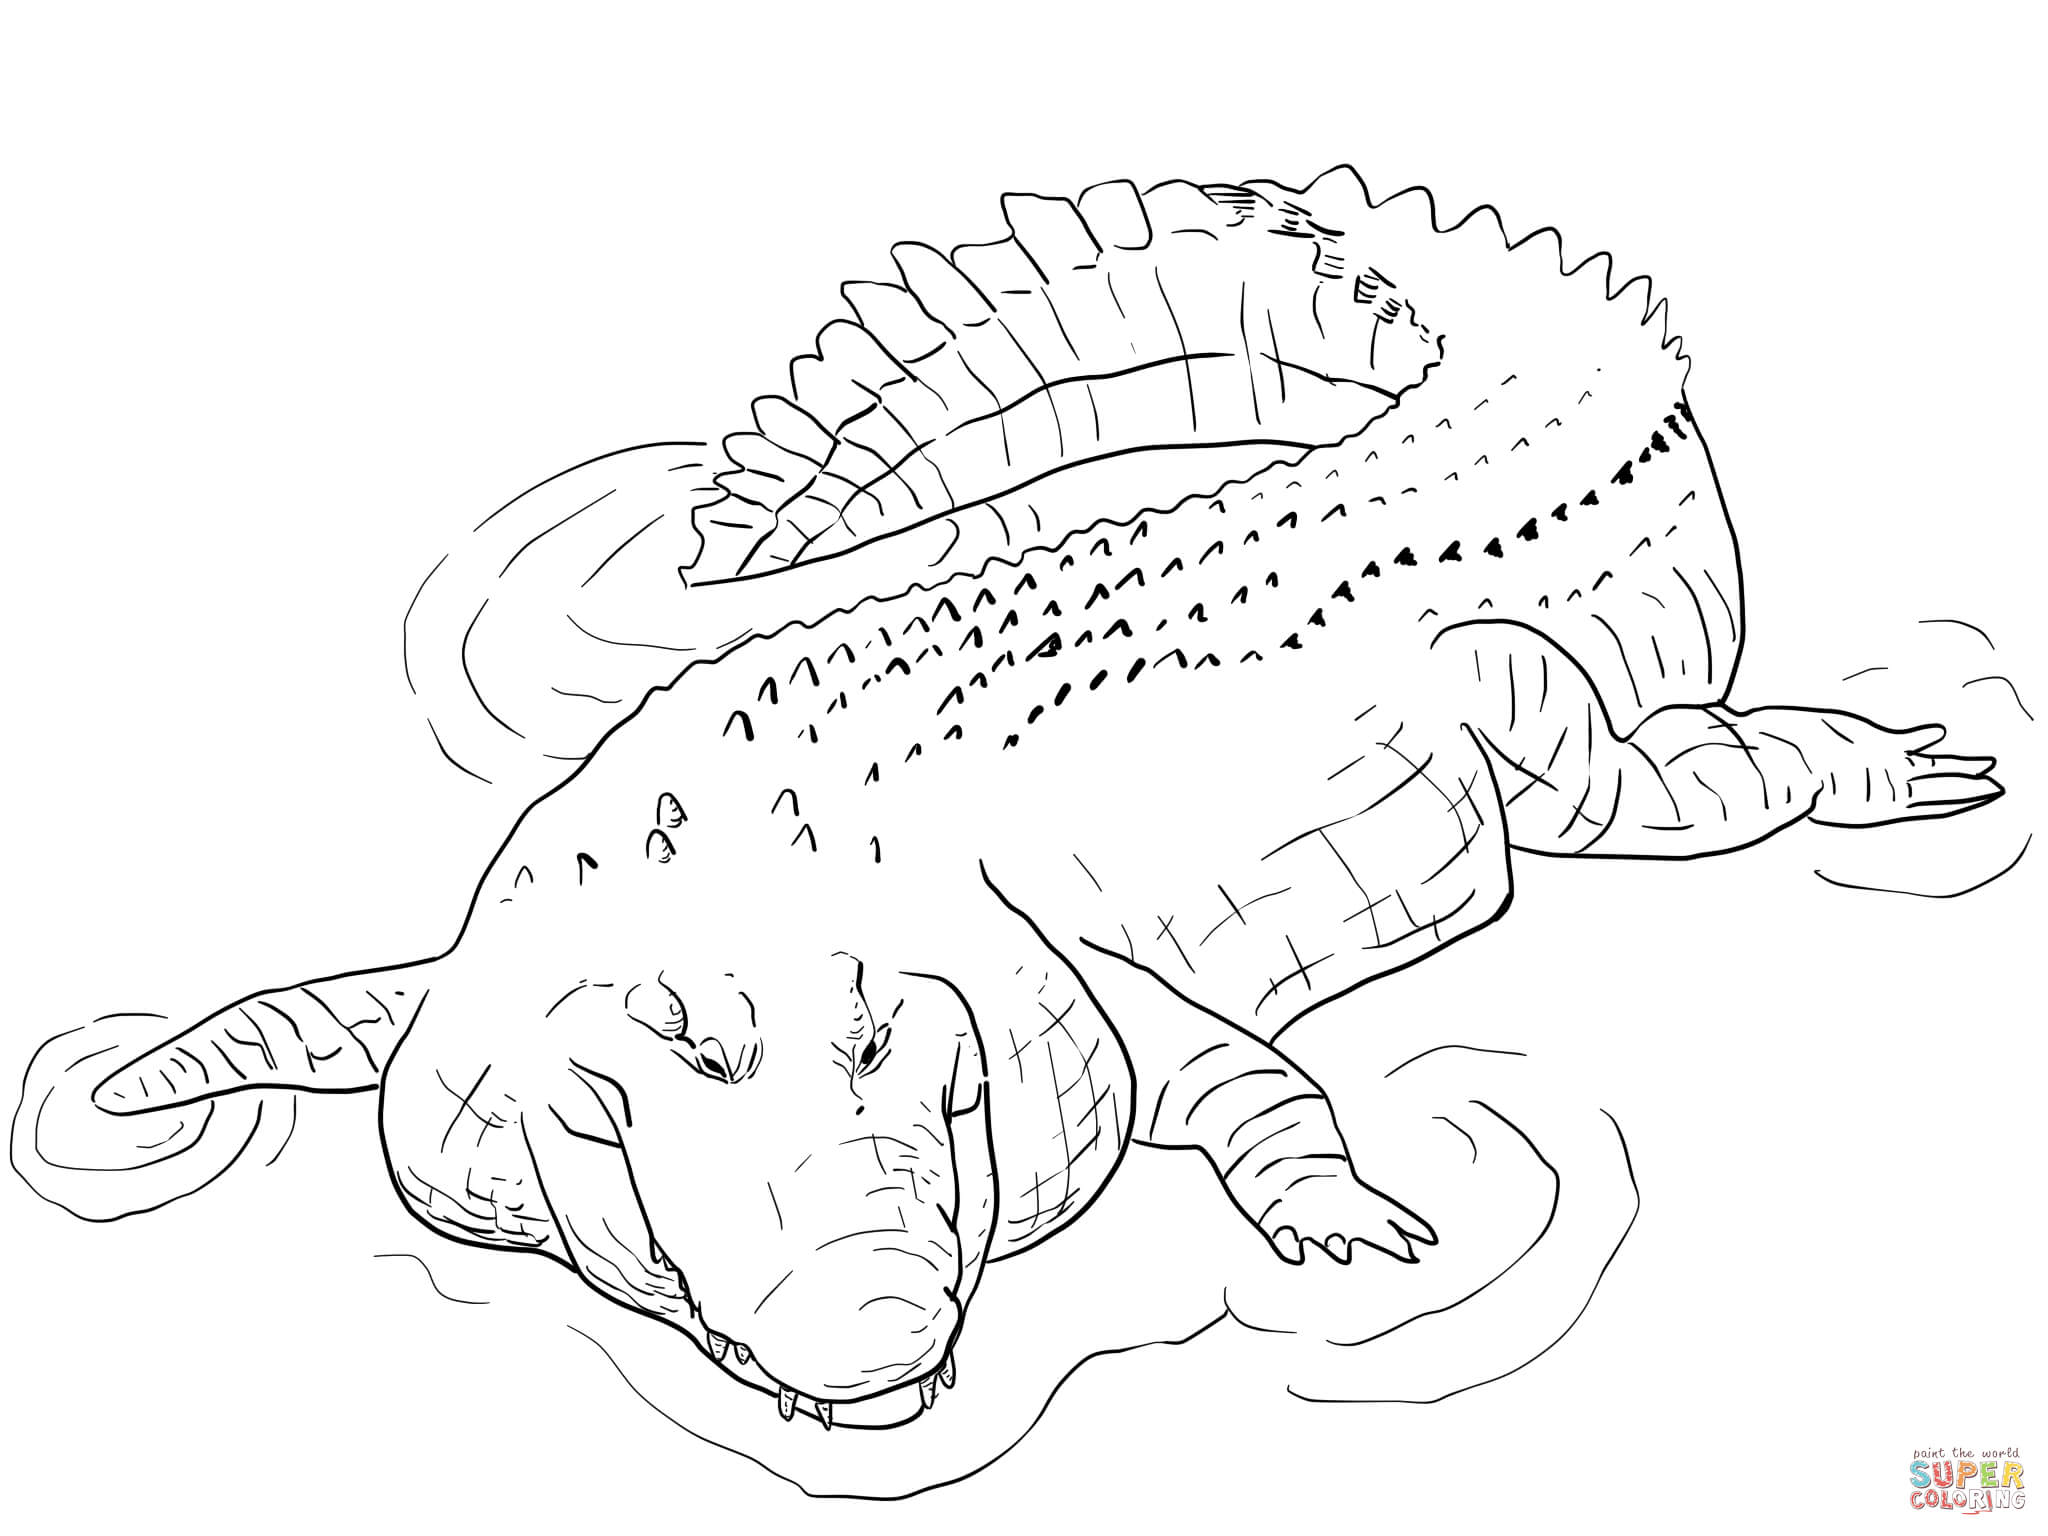 Indo pacific saltwater crocodile coloring page free printable coloring pages